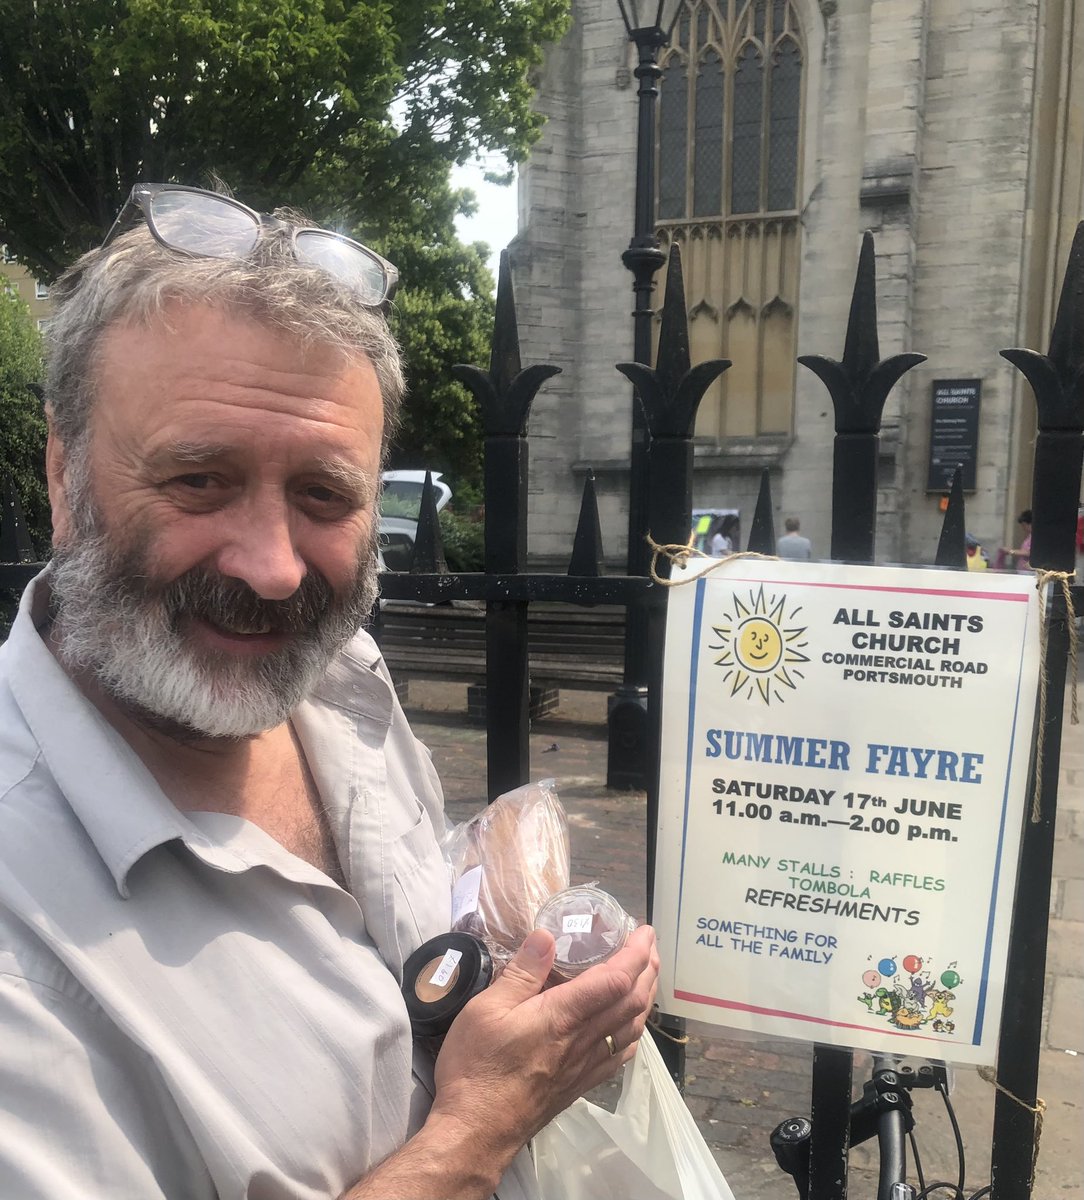 As @portsmouthld local Cllr enjoyed #summer #allsaints fayre today renew acquaintances + Minnie; raising funds for local good works. Bought favs apricot jam, cherry cake, home-made marmalades date&walnut cake #LibDems #Buckland #Portsmouth #MileEnd #allsaintschurch #southcoast